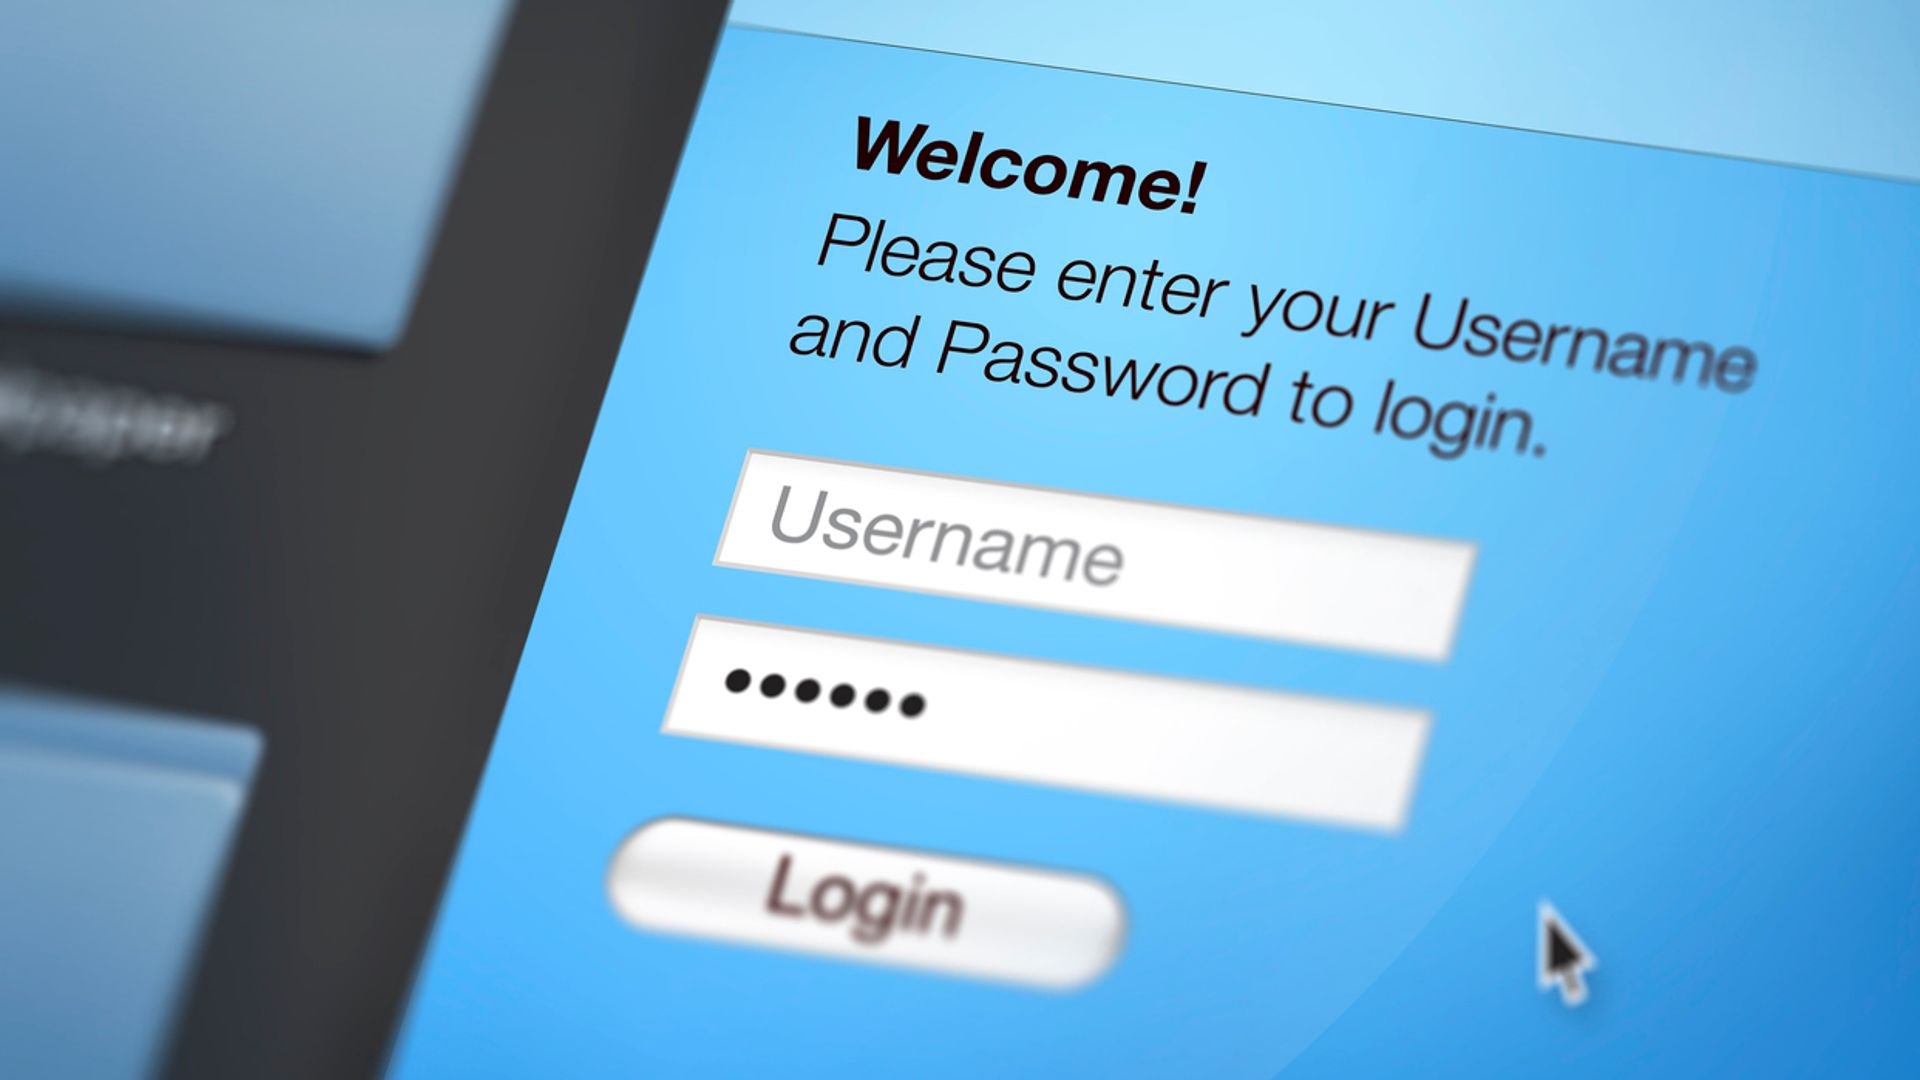 Devices with weak passwords to be banned in UK